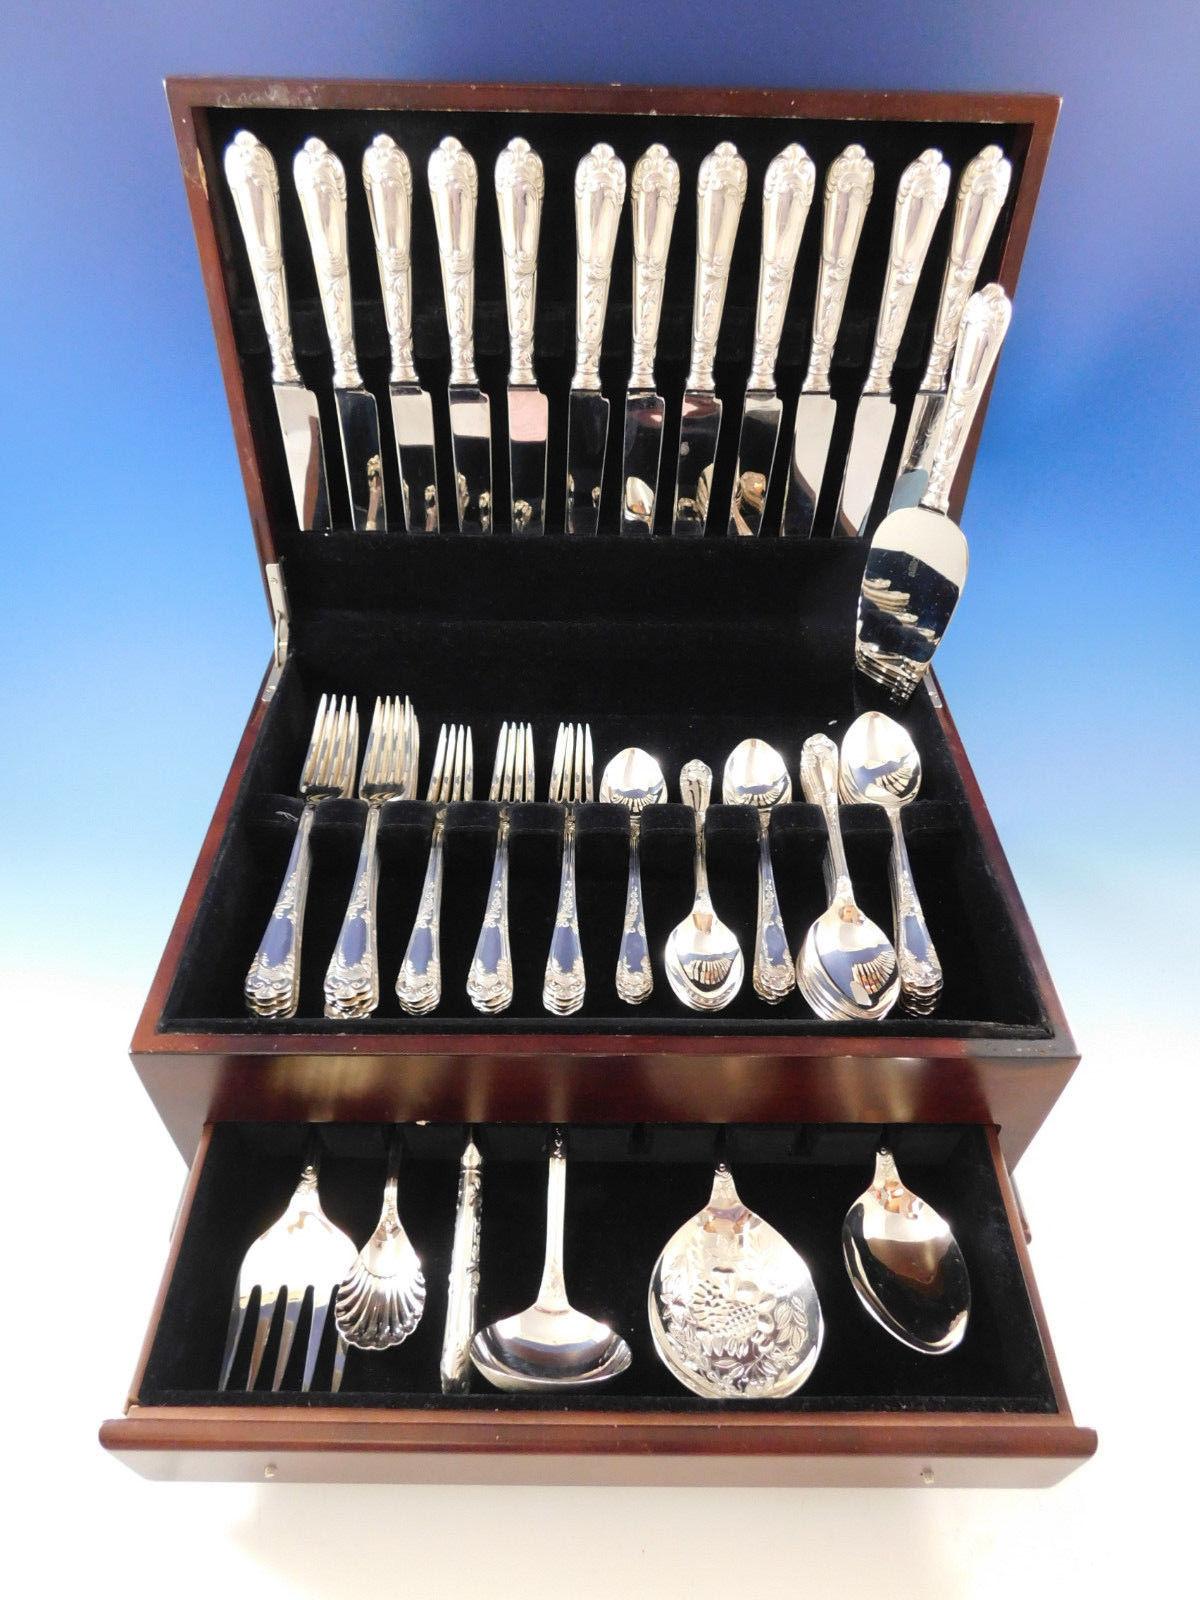 Superb dinner size La Regence by Carrs England sterling silver flatware set, 67 pieces. This is Carrs best known Art Nouveau pattern, a rich design with a honeysuckle and leaf decoration. This set includes:

12 dinner size knives, 9 5/8